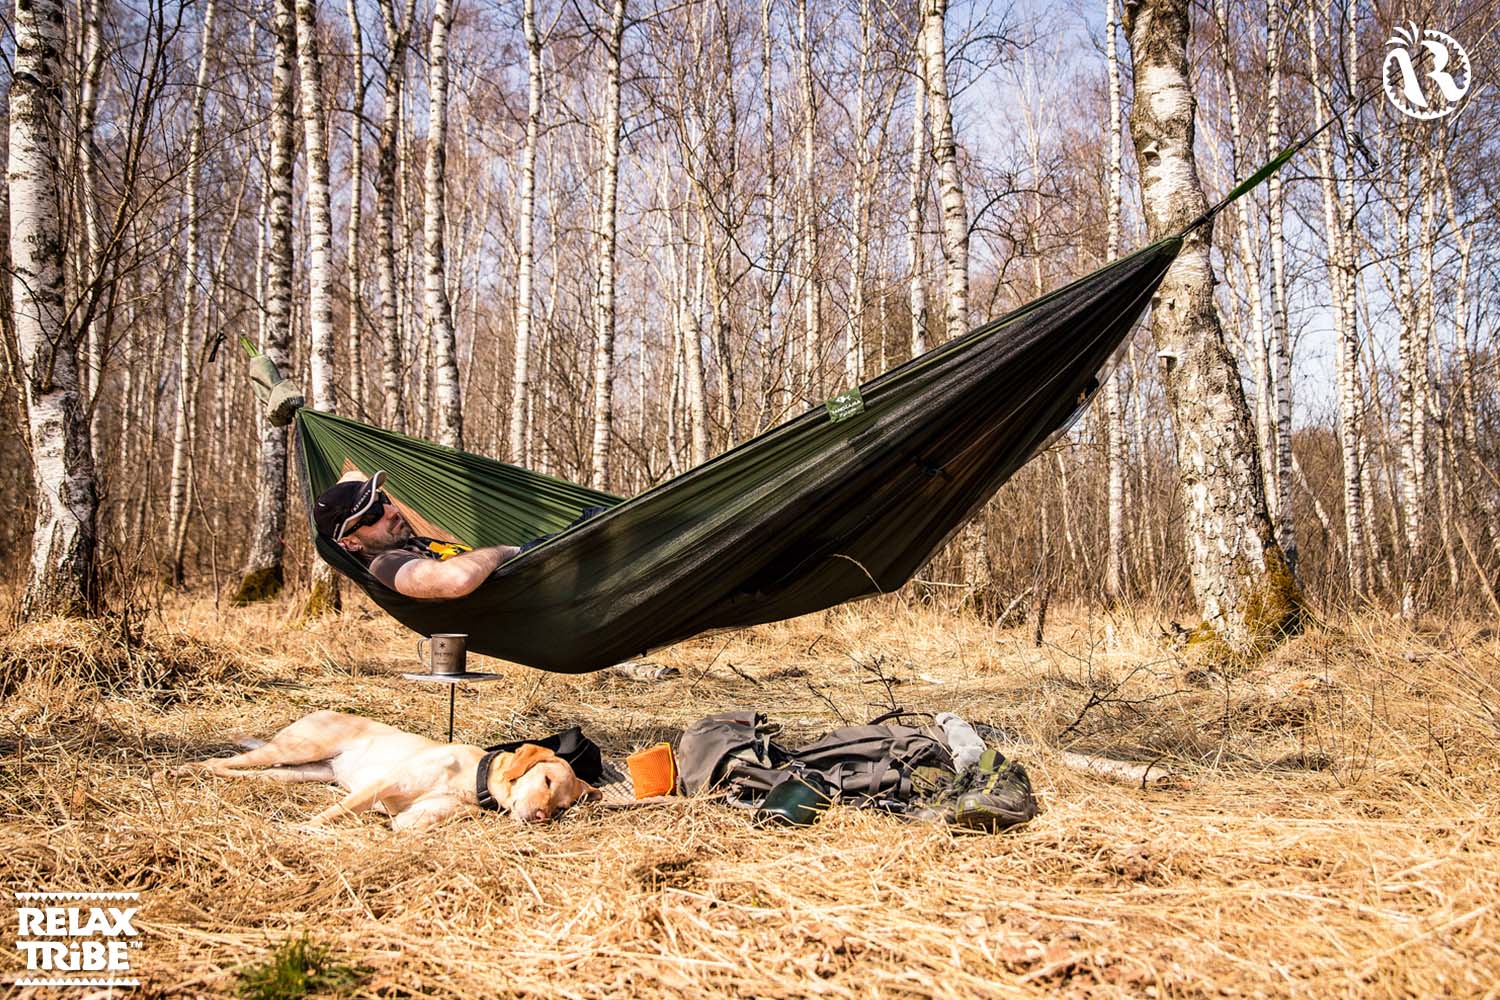 adventure-hero-xxl-single-portable-hammock-anti-bugs-net-thermal-pocket-outdoor-camping-brown-green-forest-trees-2